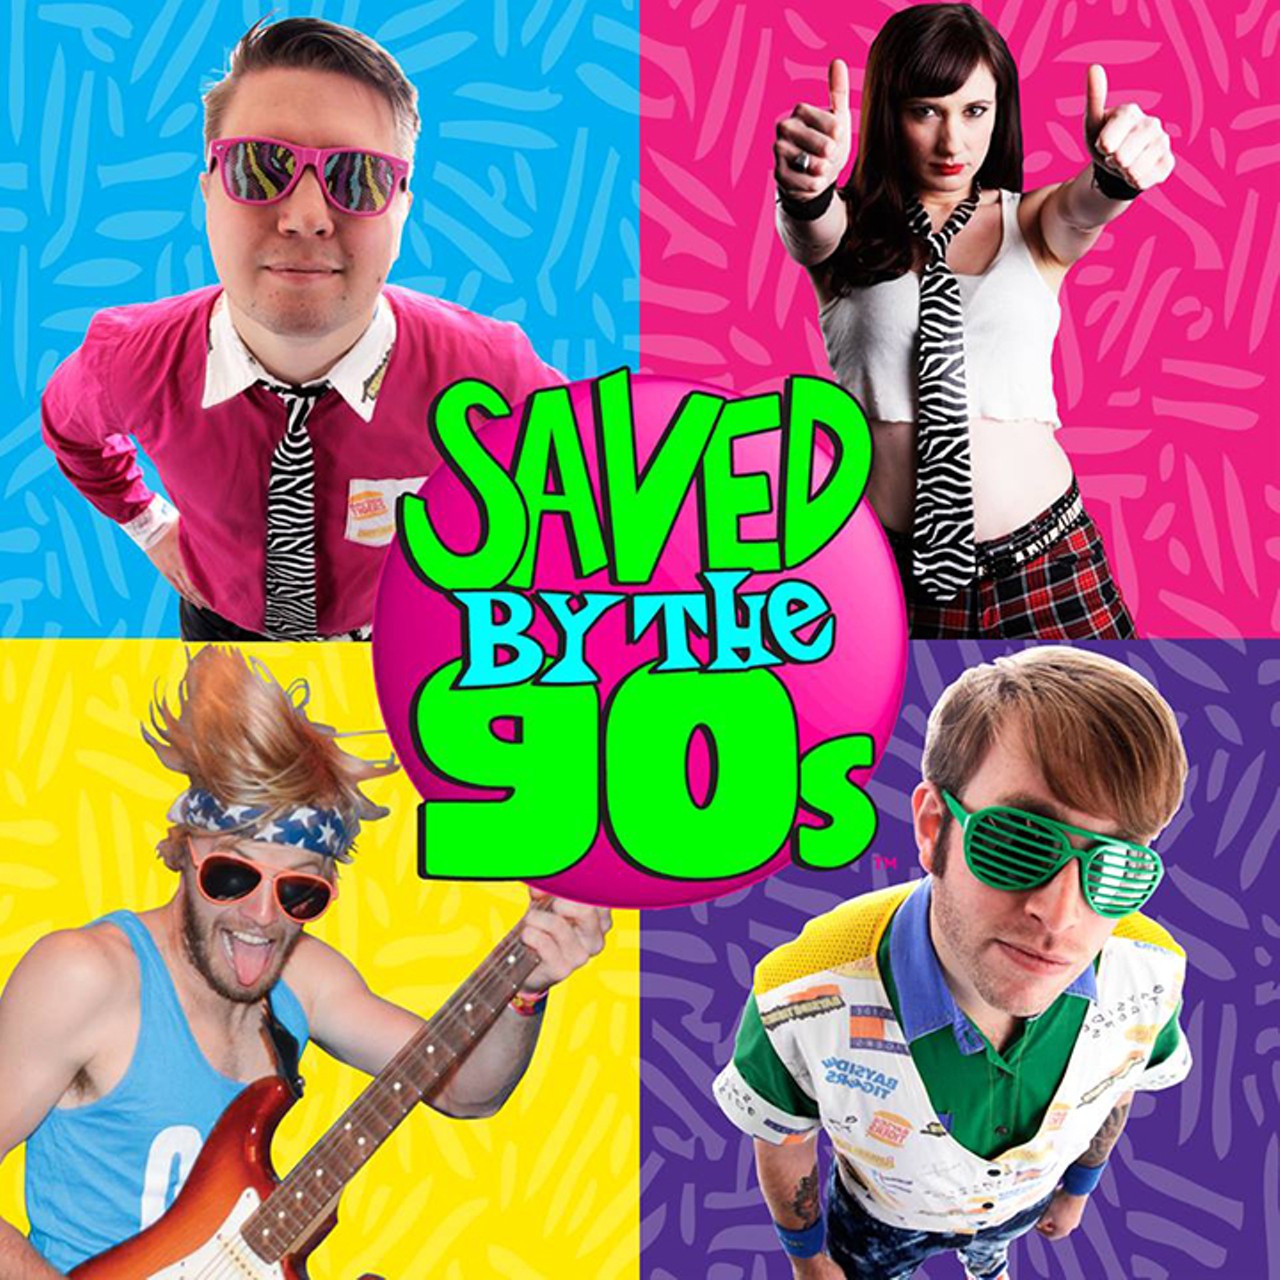 Friday, June 16Save by the '90s at House of Blues